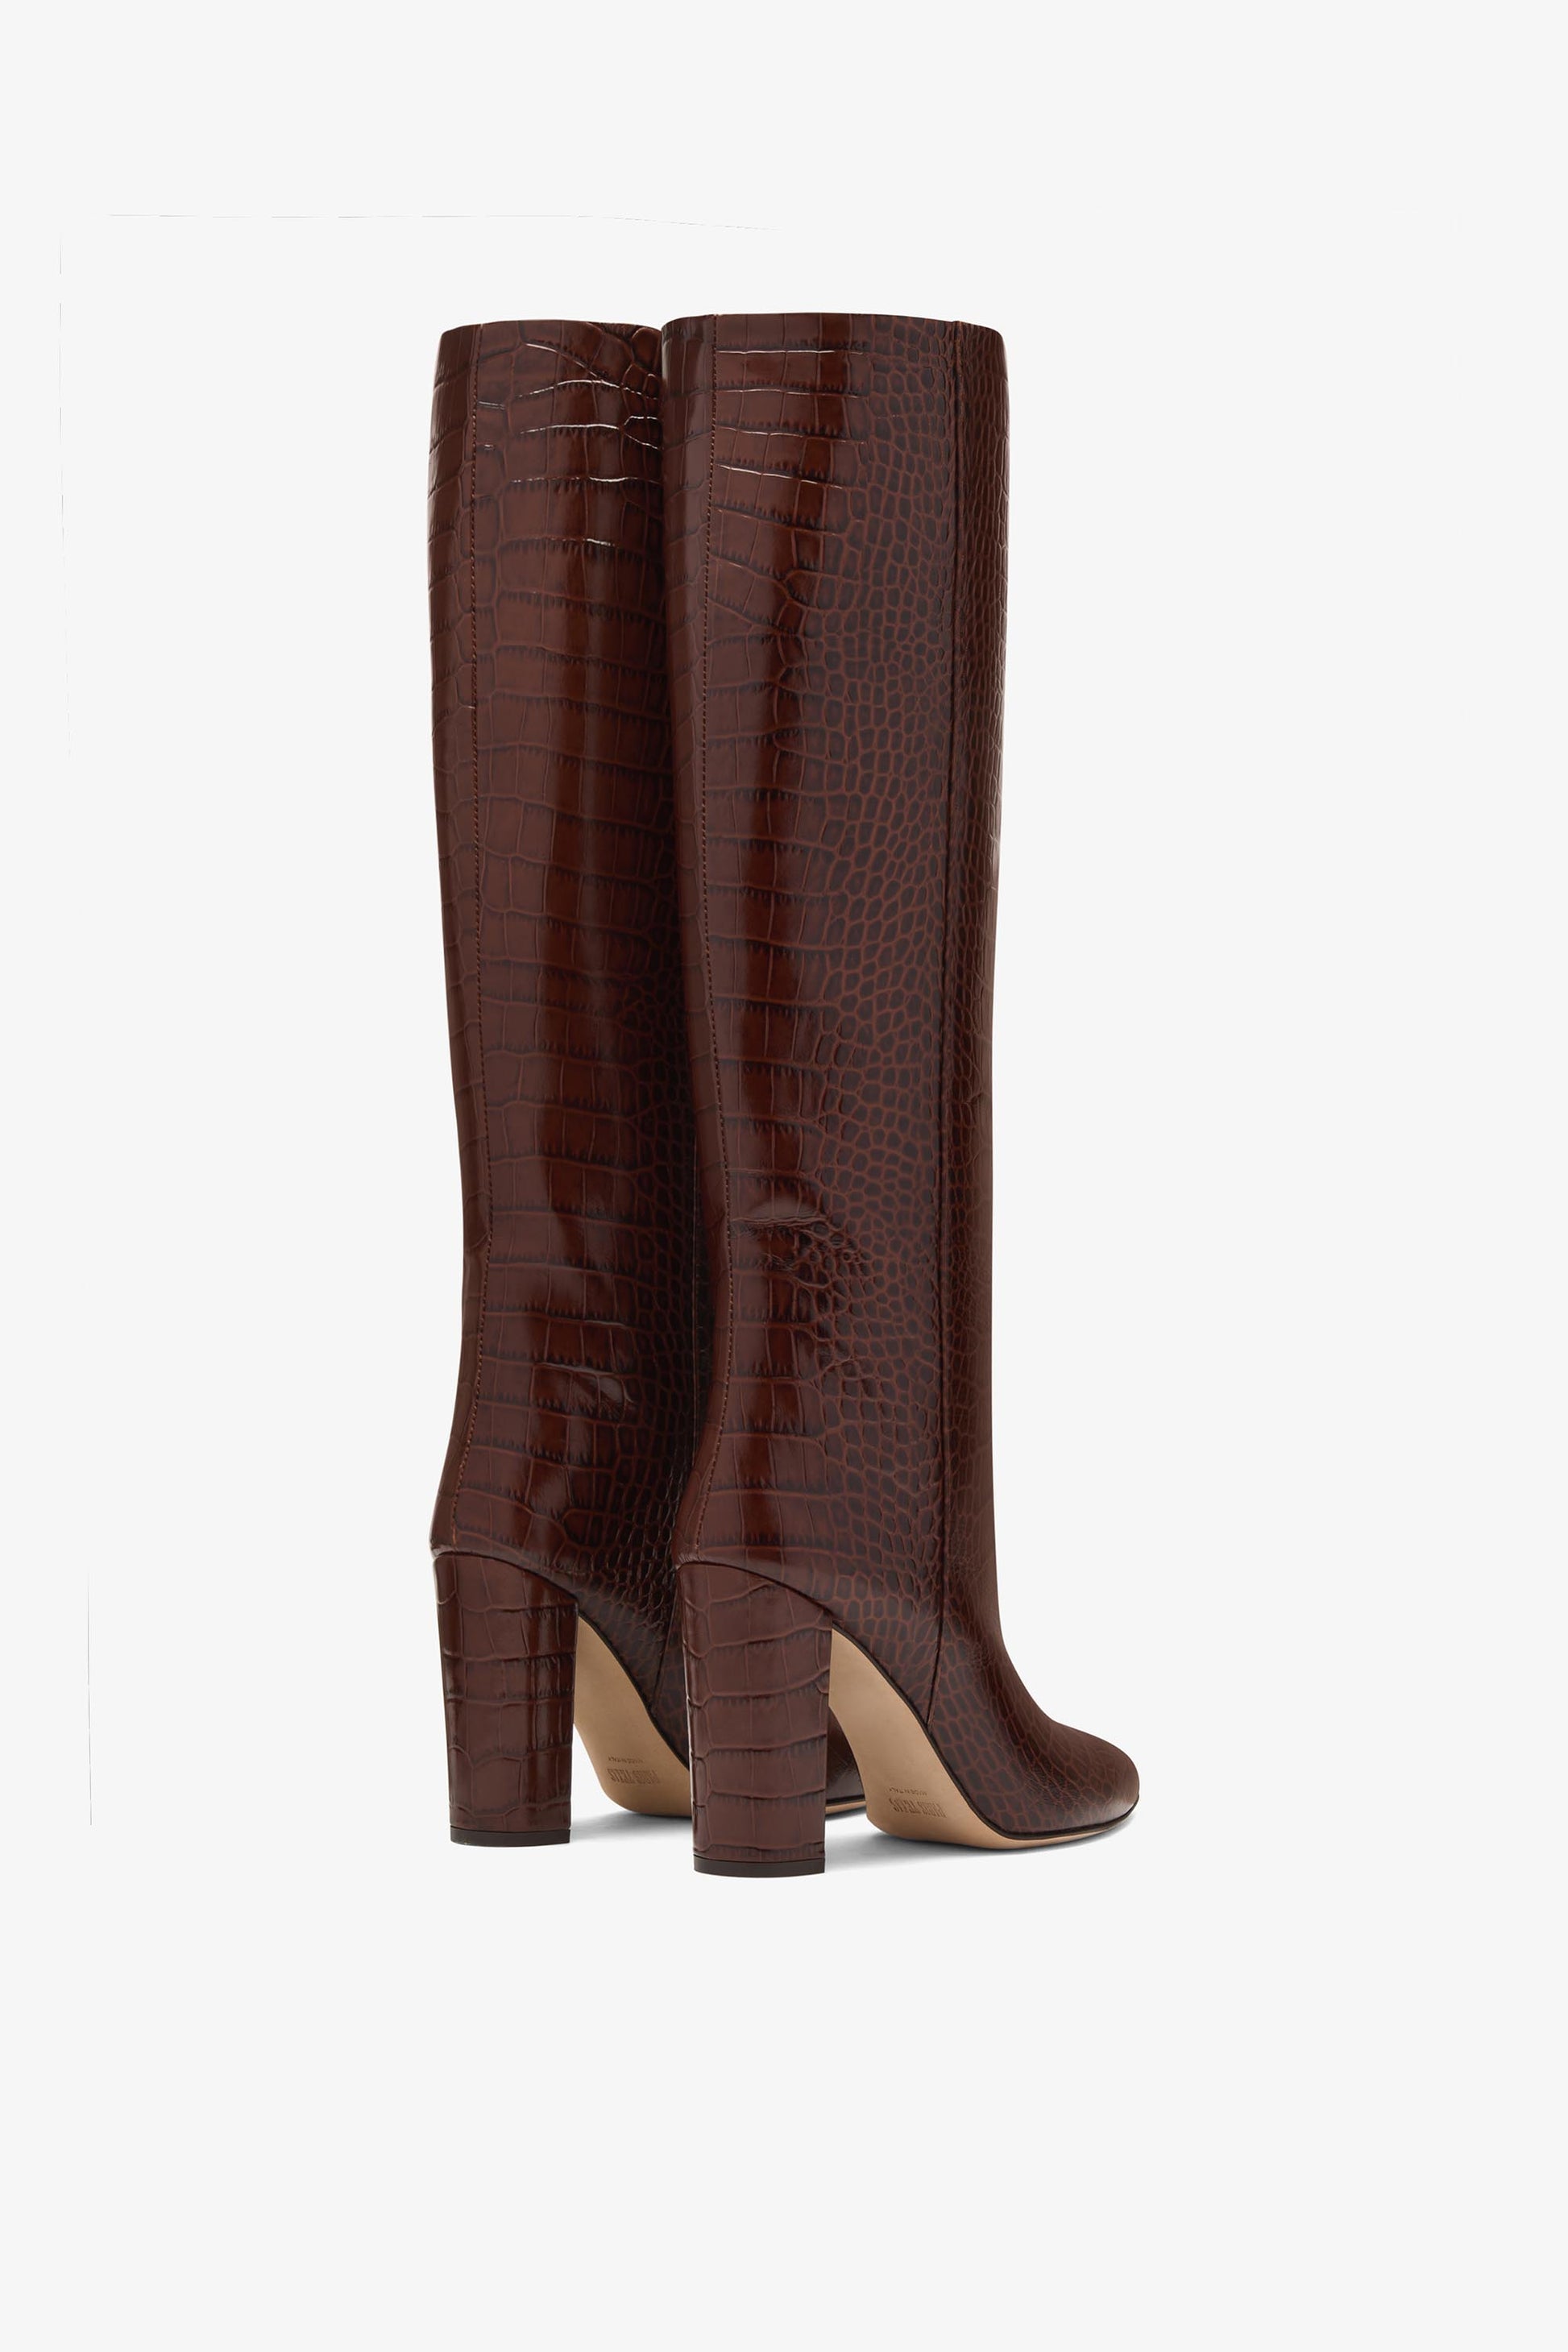 Chocolate brown croc-effect leather boots